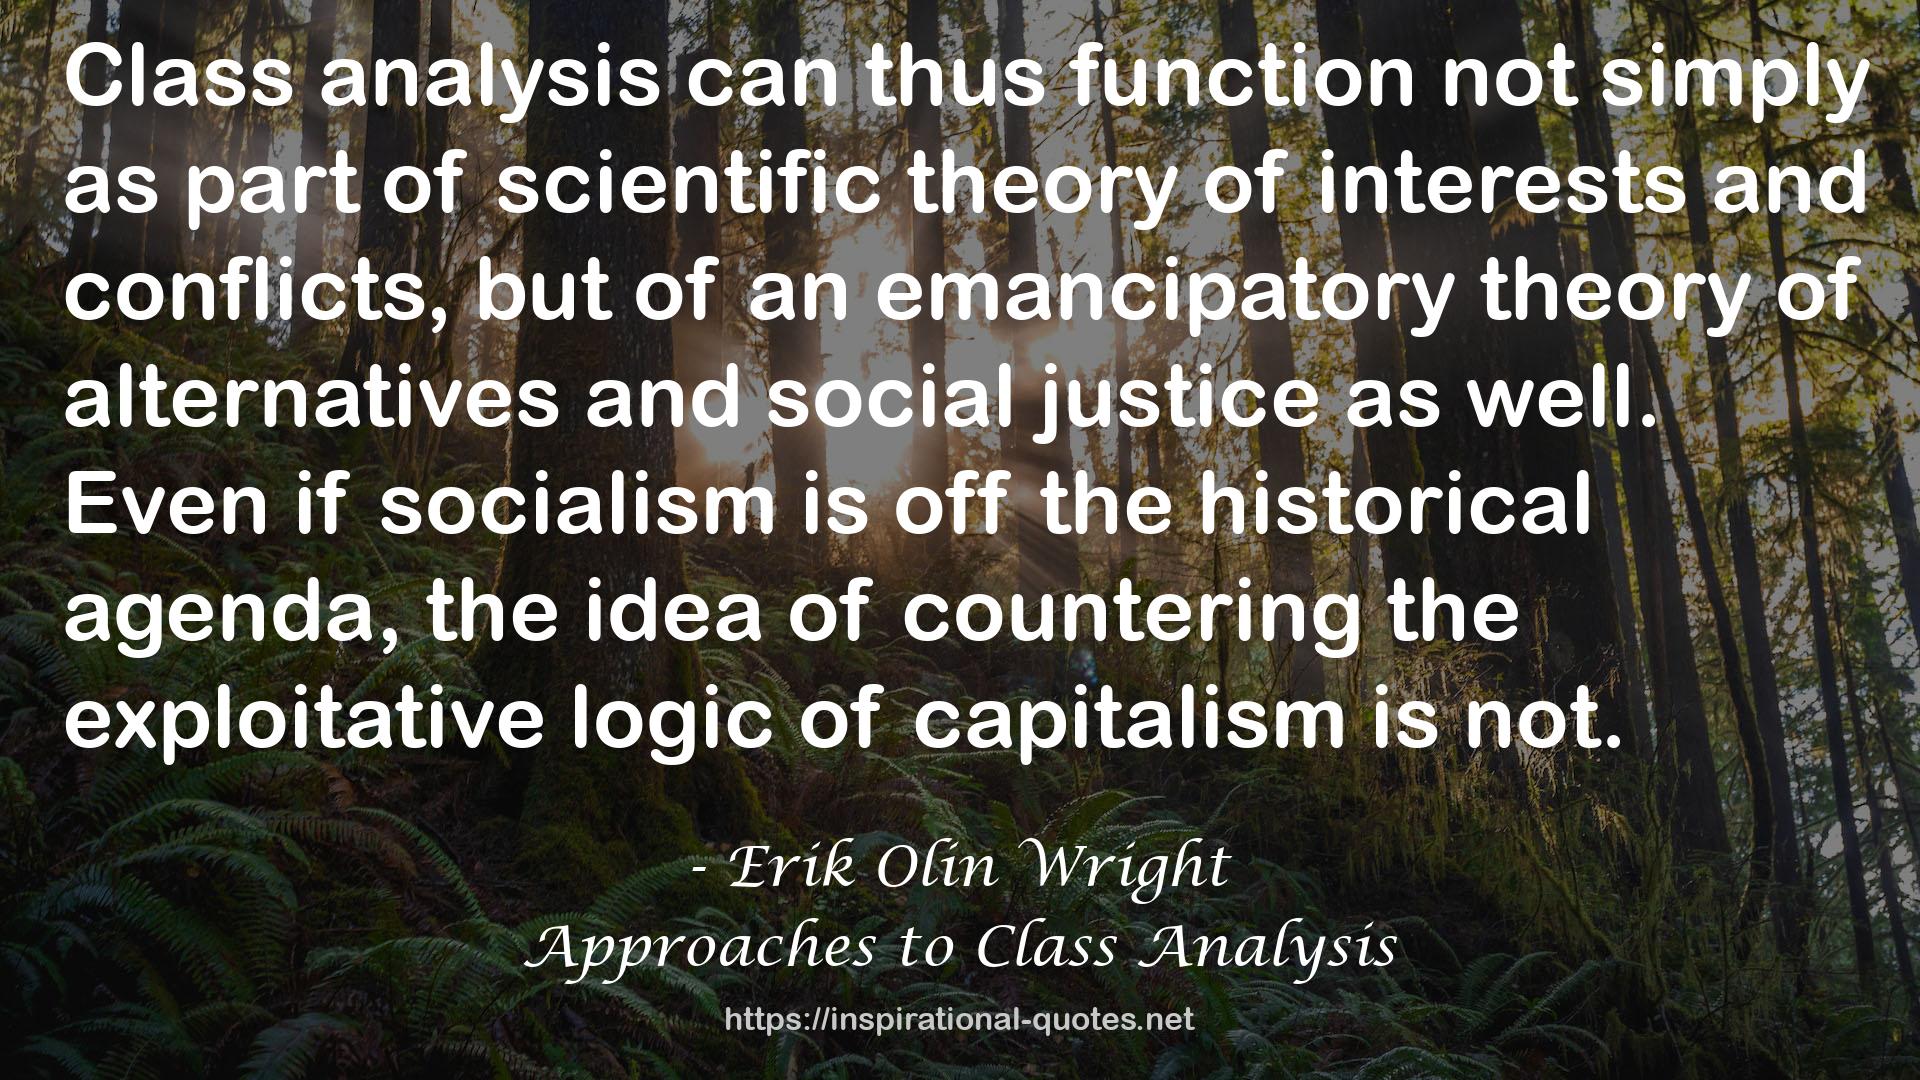 Approaches to Class Analysis QUOTES